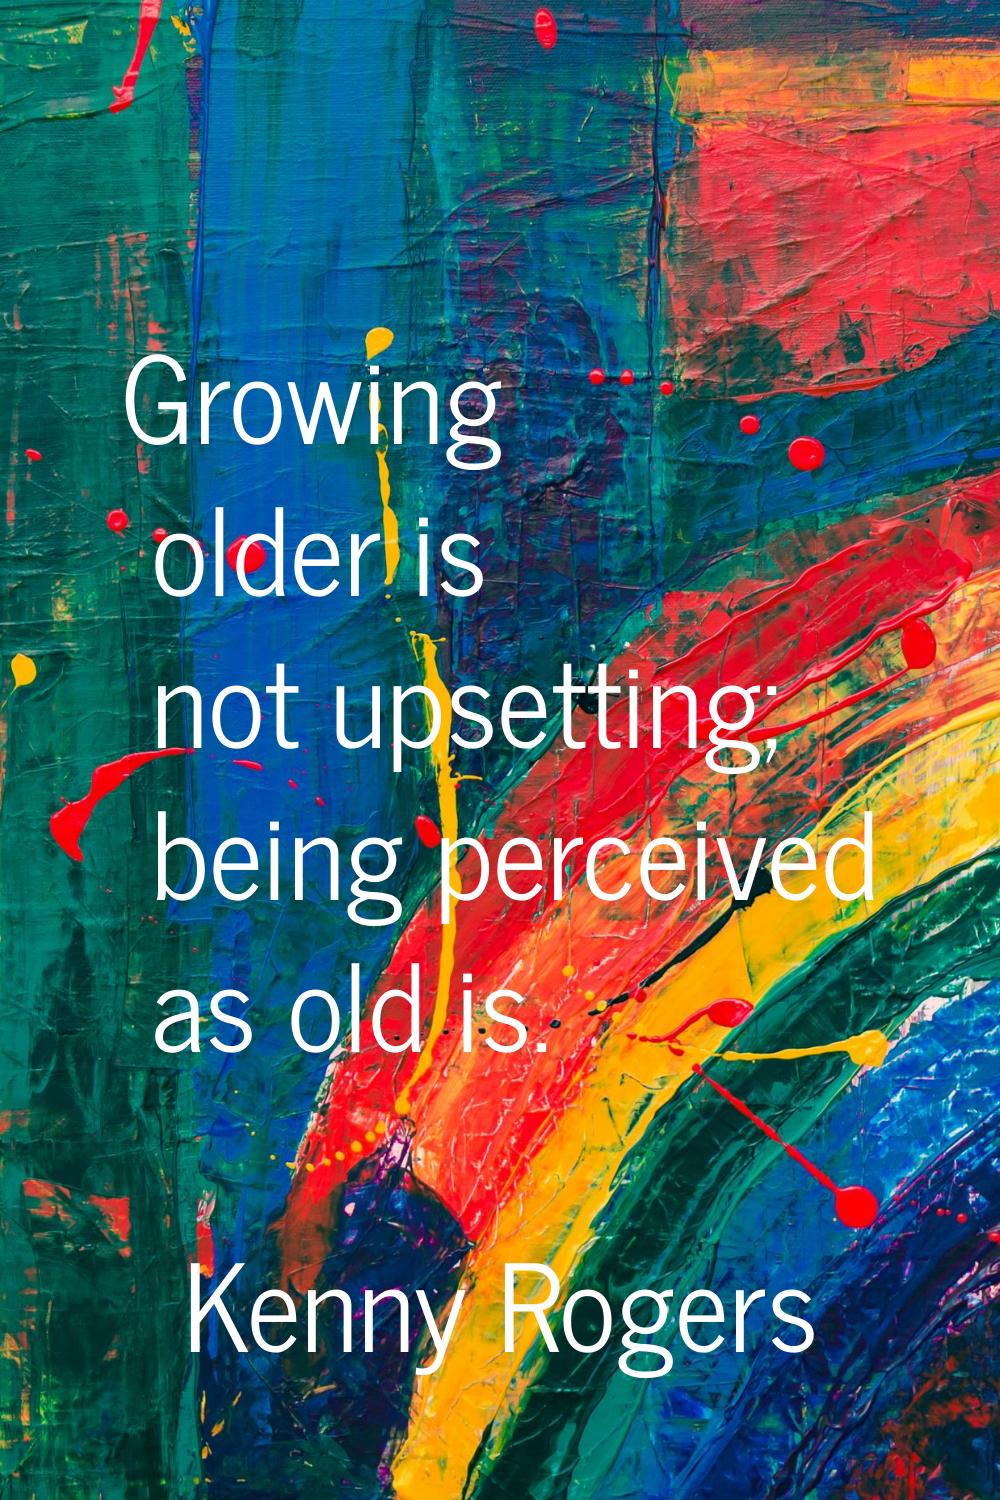 Growing older is not upsetting; being perceived as old is.